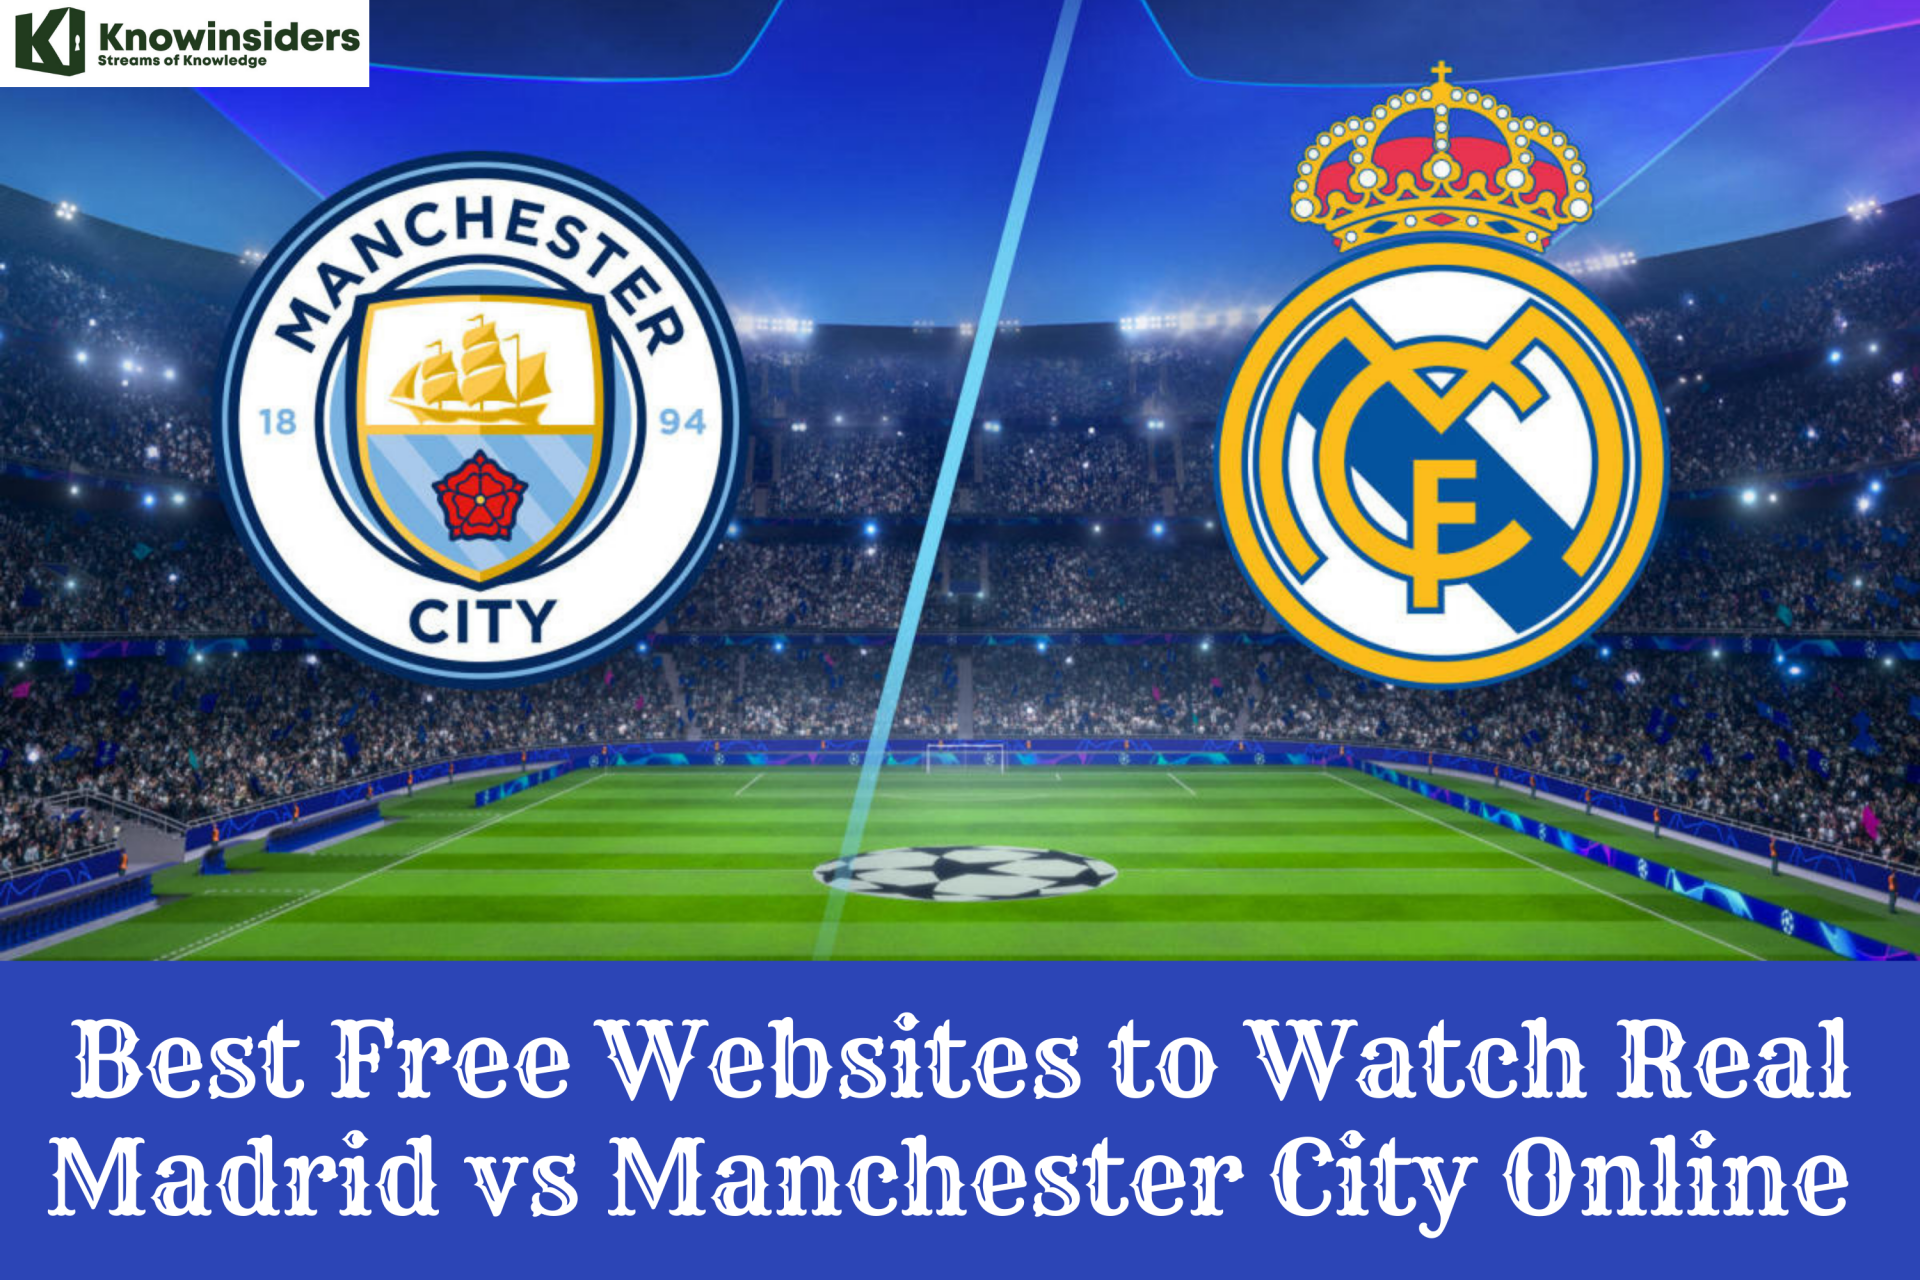 Top 10 Best Free Sites to Watch Real Madrid vs Man City Online - Champions League Semi-finals